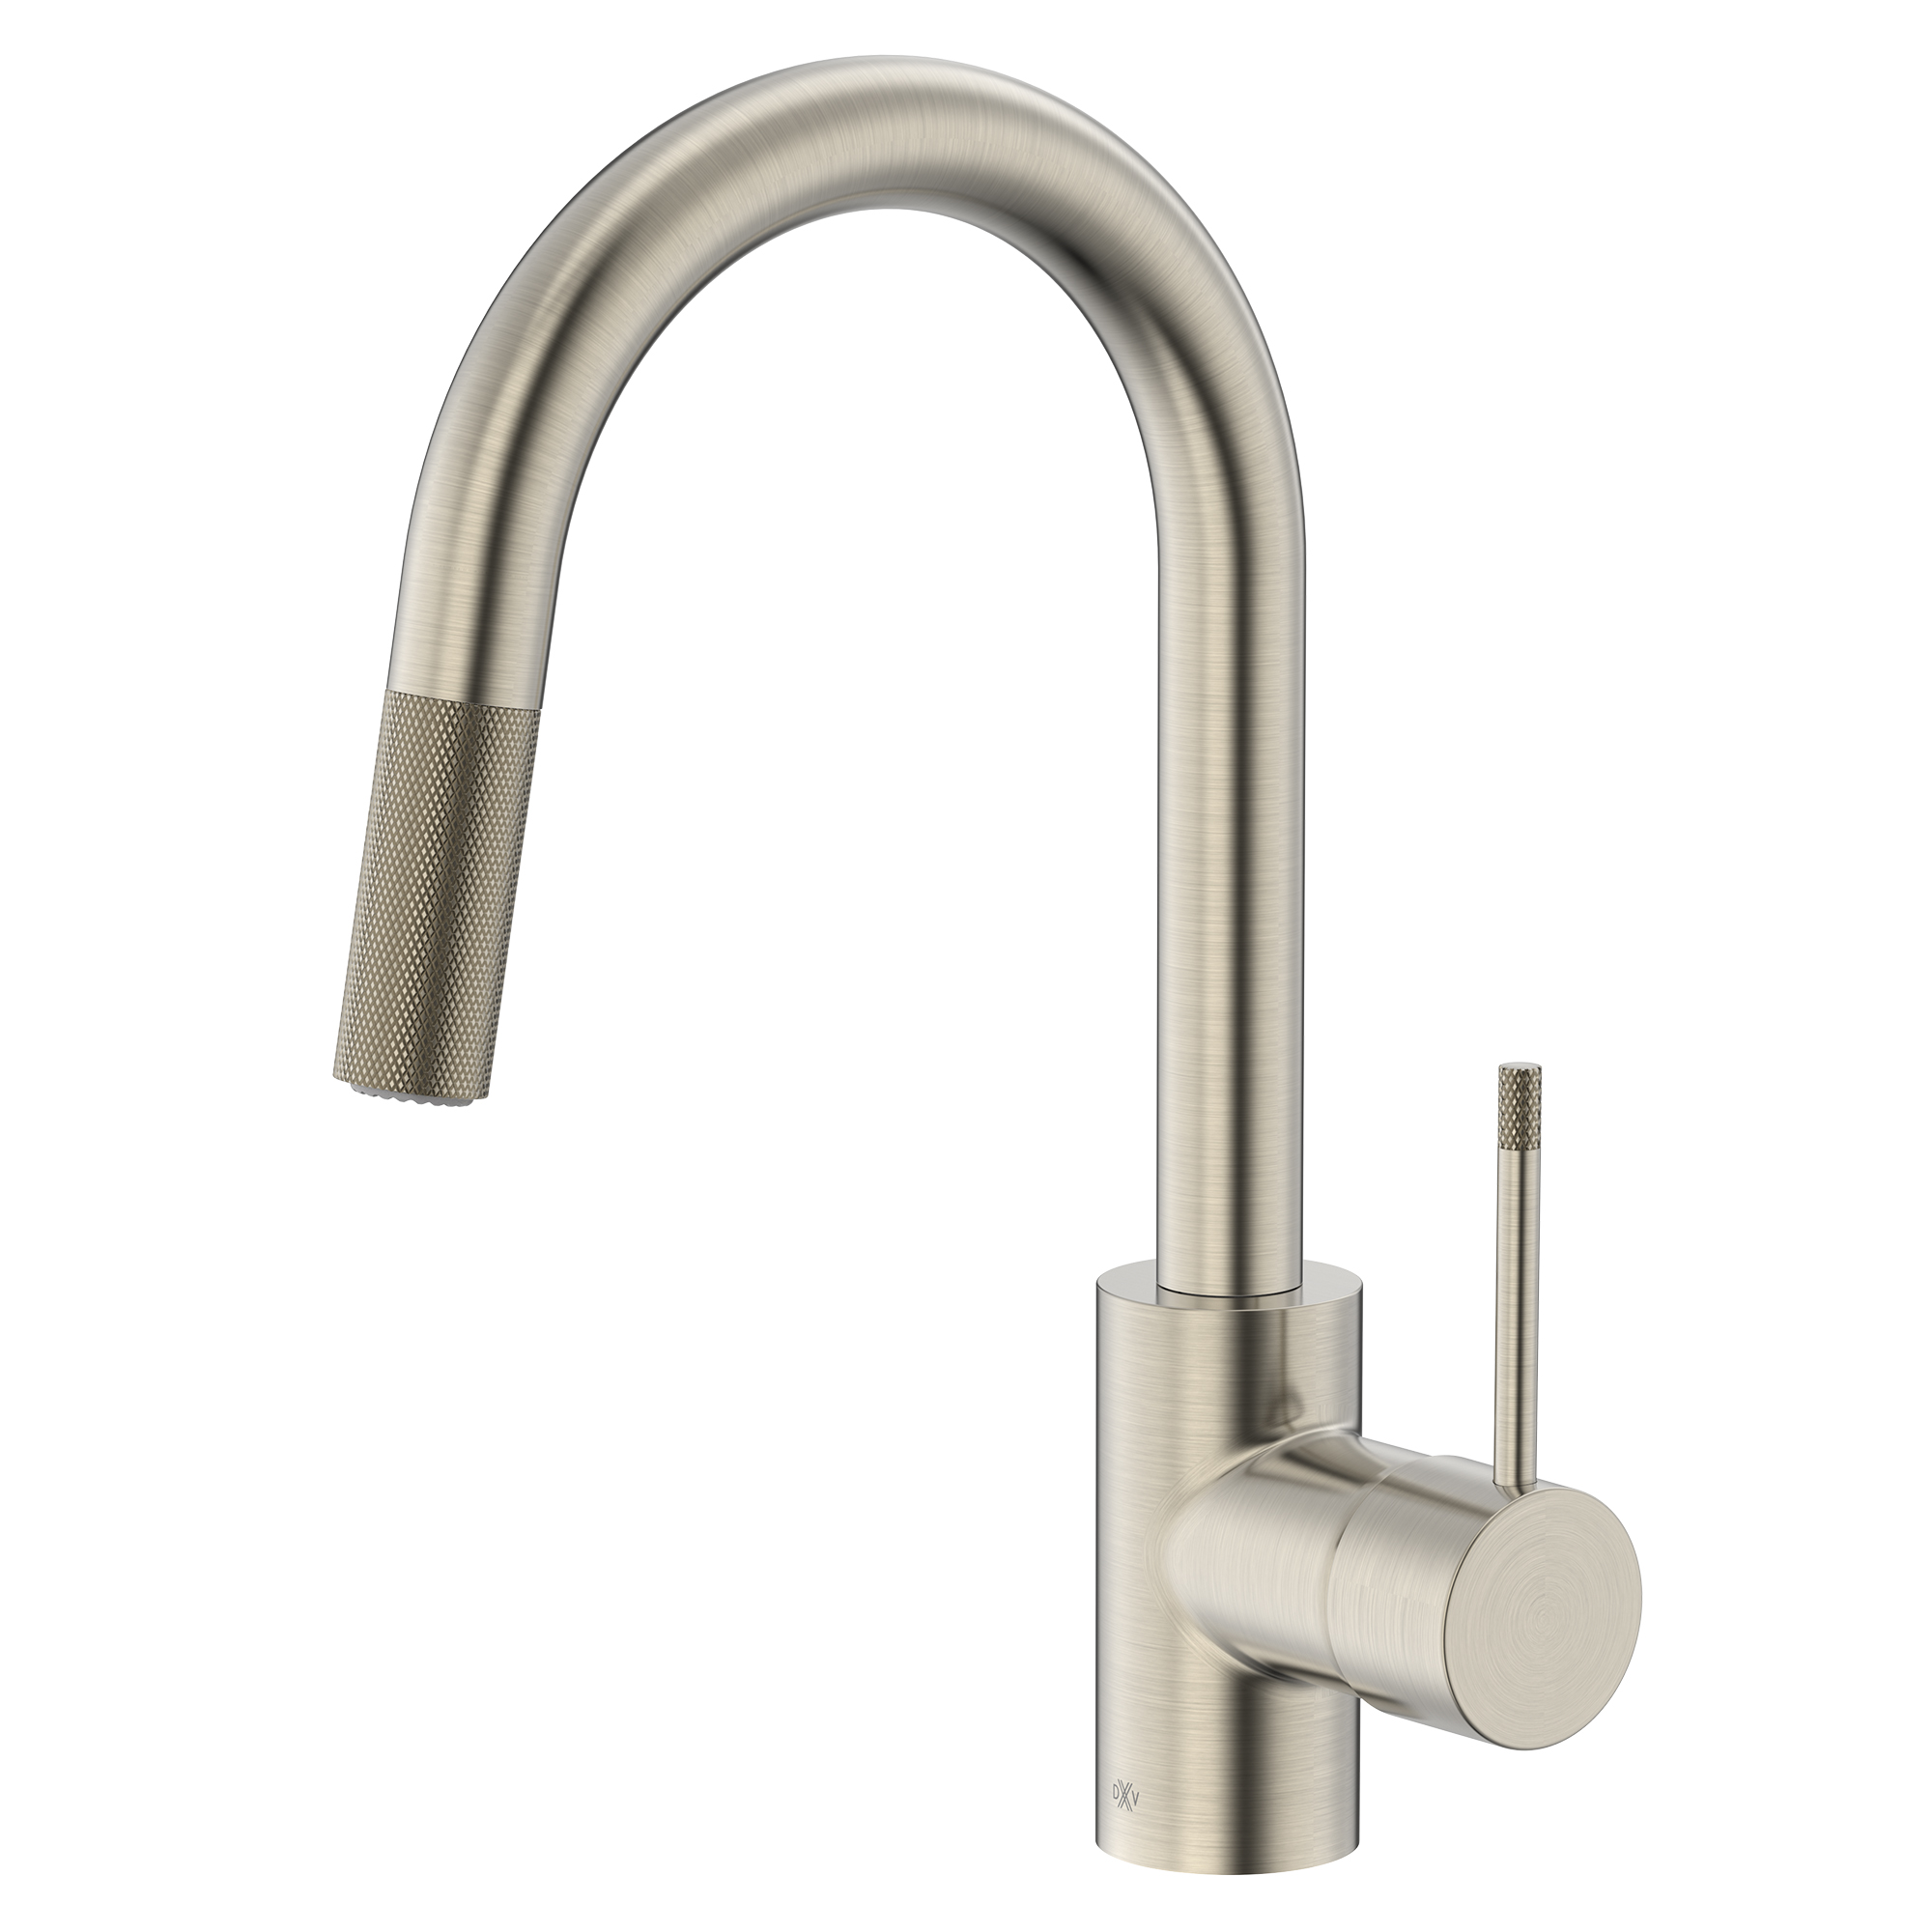 Etre Single Handle Bar Faucet with Lever Handle